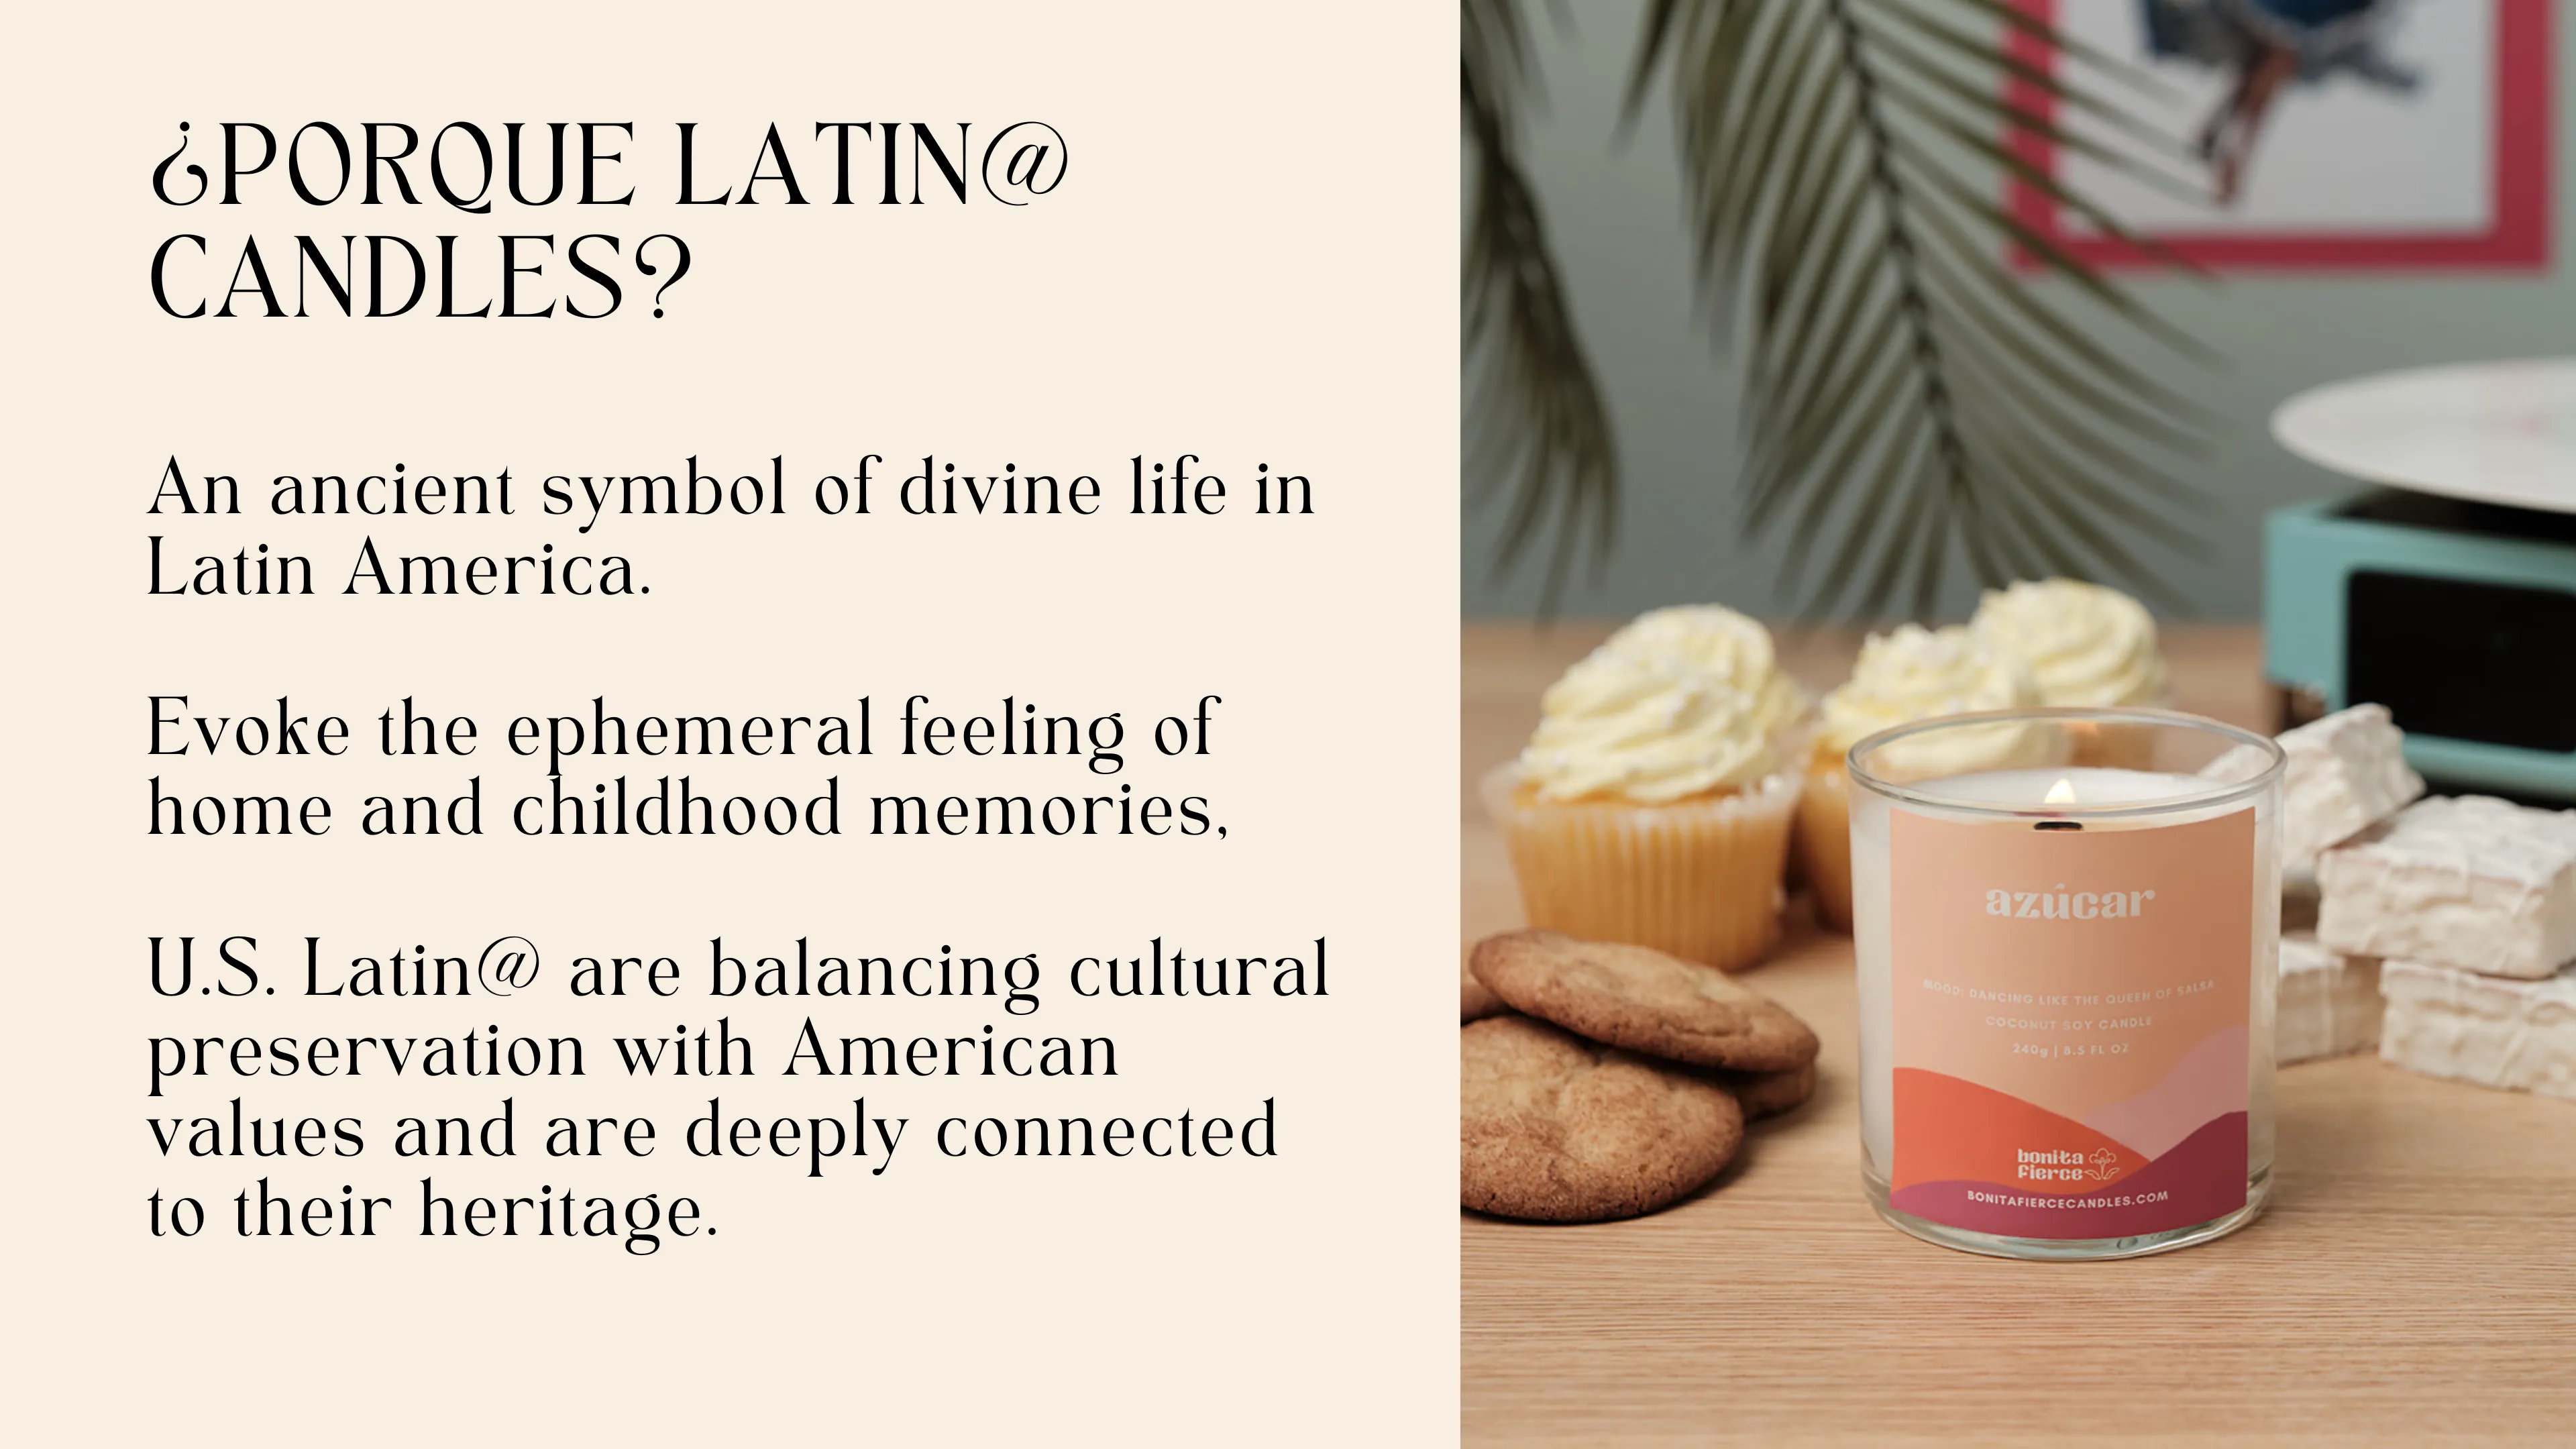 Porque Latin Candles? An ancient symbol of divine life in Latin America. Evoke the ephemeral feeling of home and childhood memories. U.S. Latinos are balancing cultural preservation with American values and are deeply connected to their heritage.